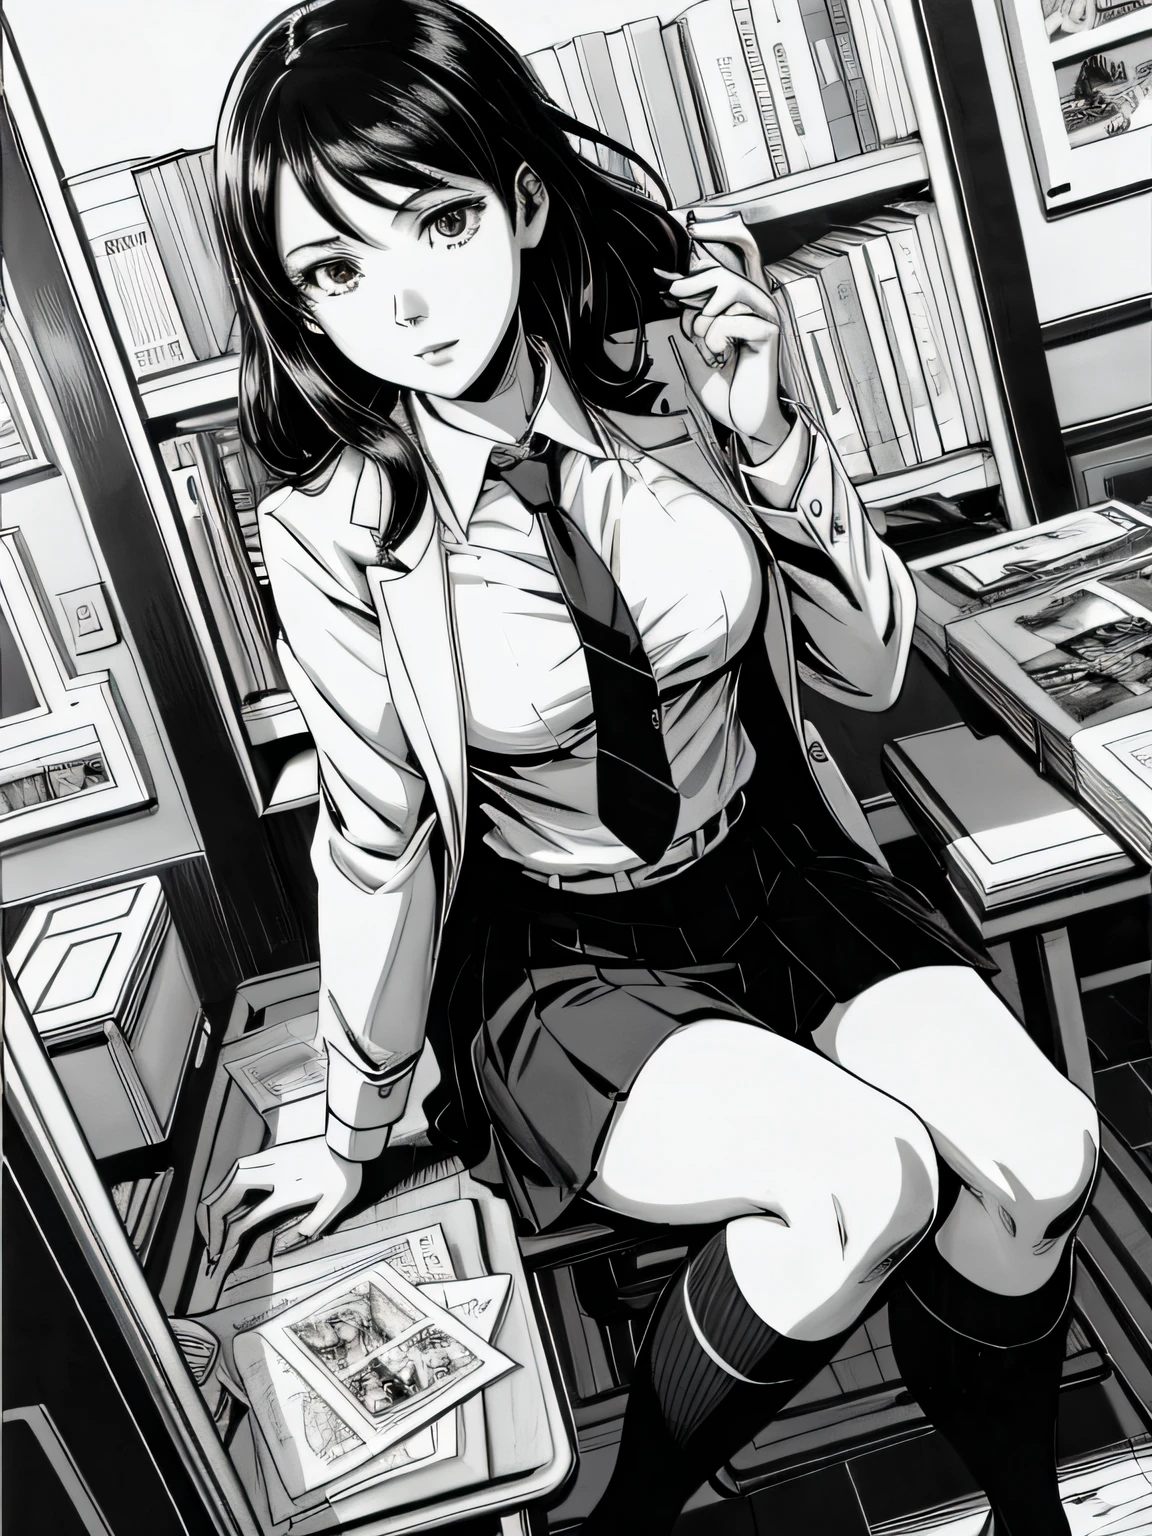 of the highest quality, Best Quality,超A high resolution, hight resolution, (masutepiece), (Comic noir style illustration), (linear art_Anime),(black-and-white:1.0),(monotone_highcontrast),hi-school girl,high-school uniform、neck tie、blazers、skirt by the,Inside the school_the complex background,(Lora Add Details:0.6)